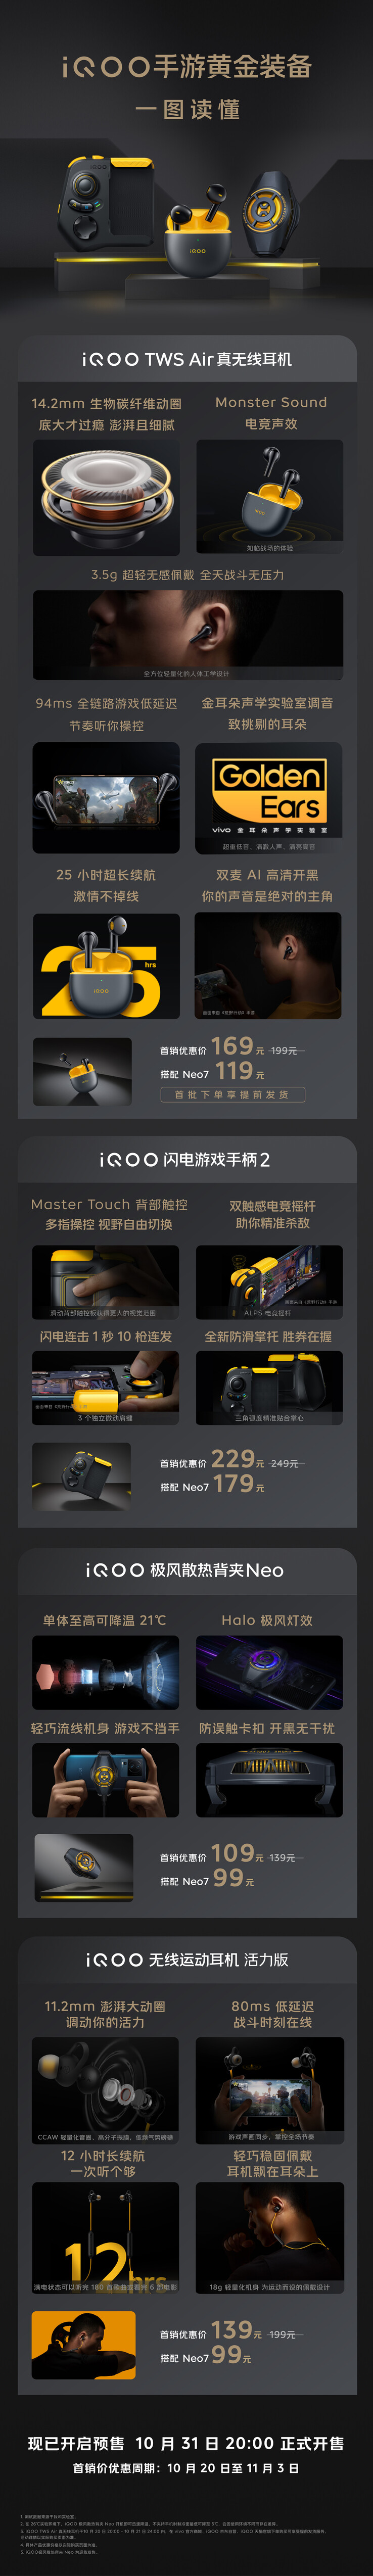 iQOO unleashes a whole ecosystem of accessories alongside the Neo7. (Source: iQOO)